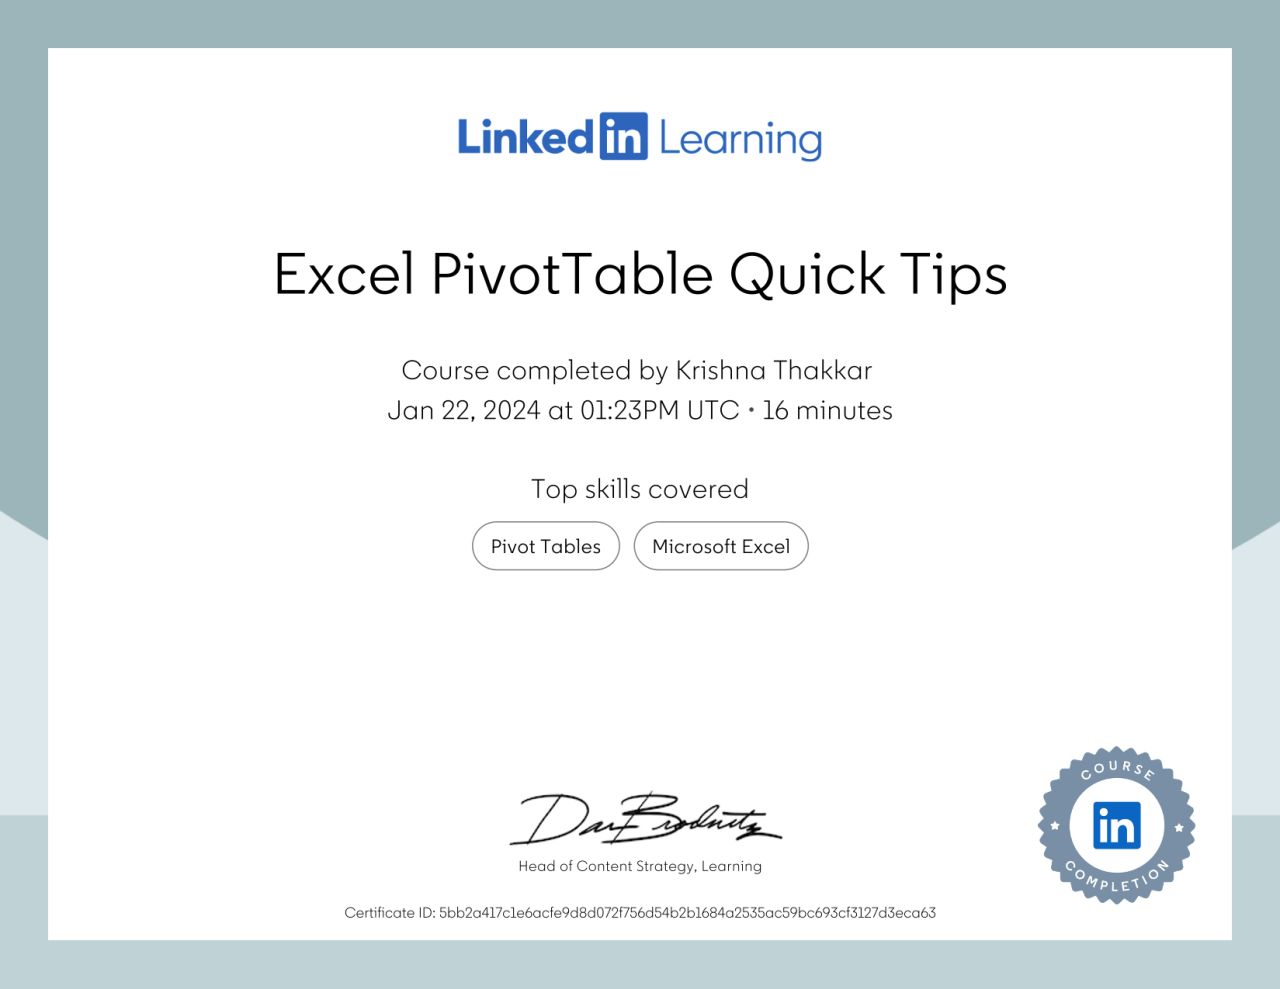 Certificate of completion for Excel PivotTable Quick Tips content earned by Krishna Thakkar